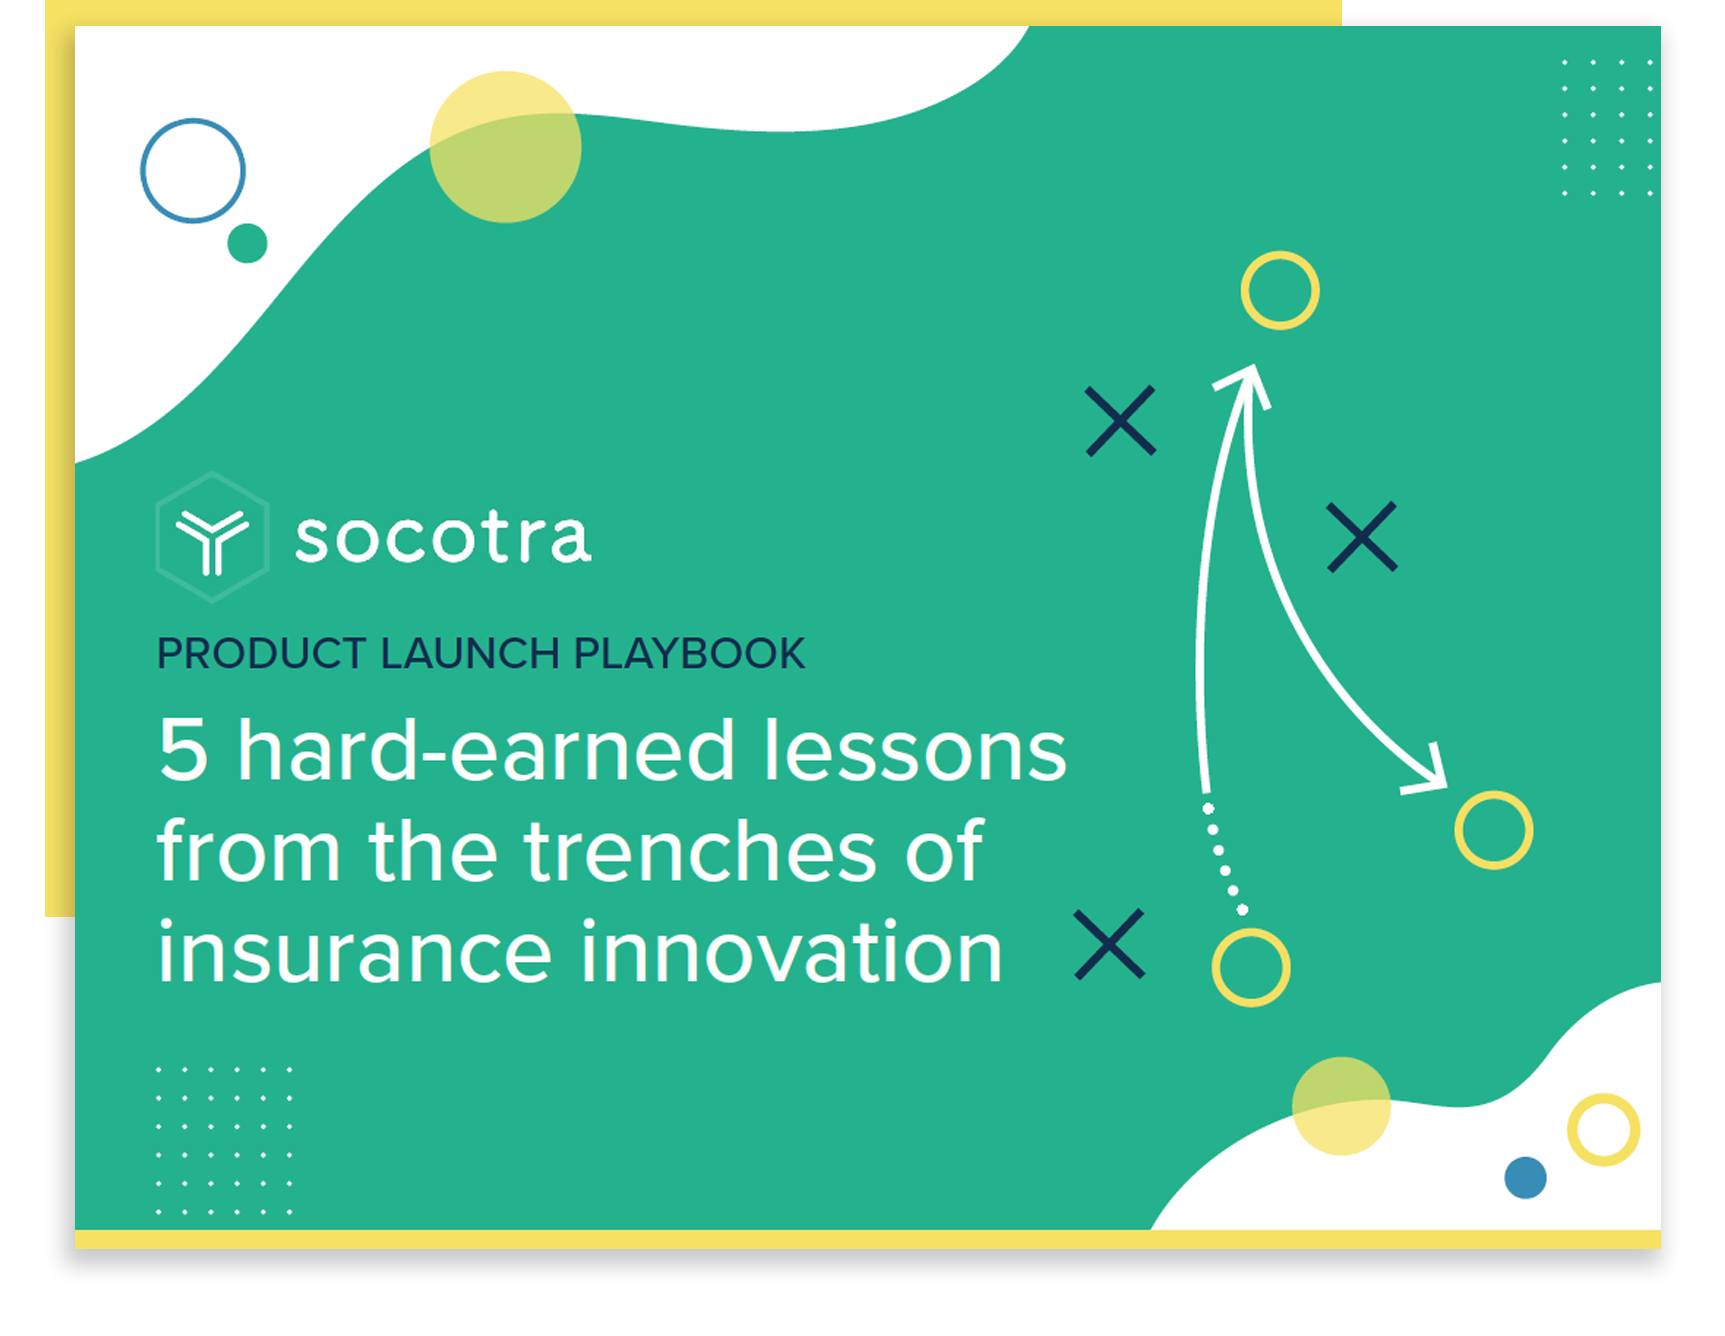 5 hard-earned lessons from the trenches of insurance innovation